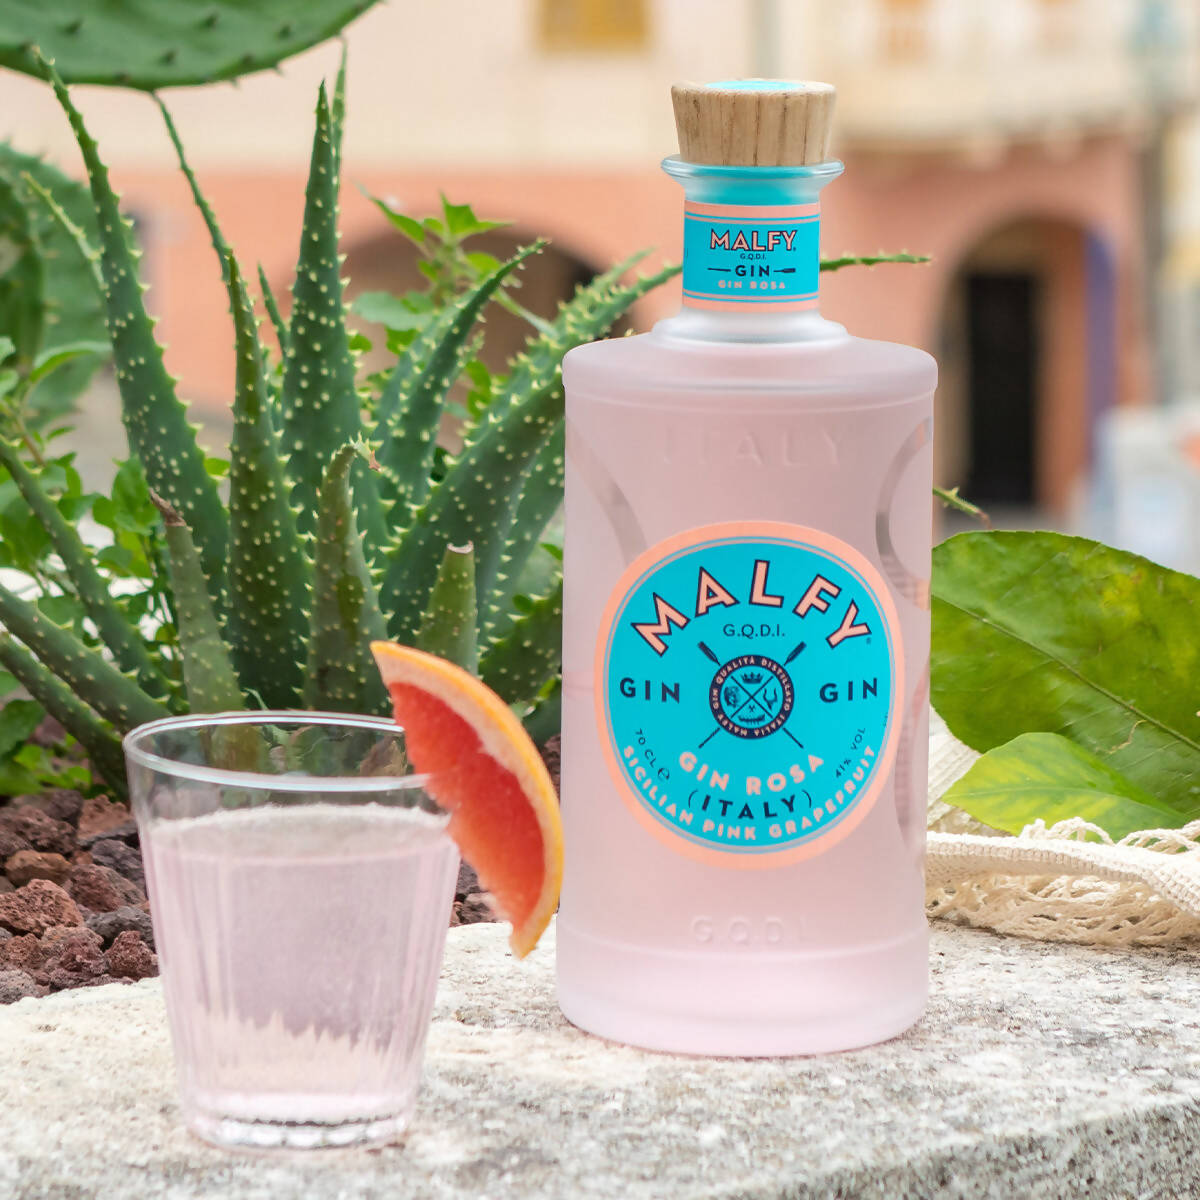 Malfy Gin Rosa Pink Grapefruit, 70cl - McGrocer